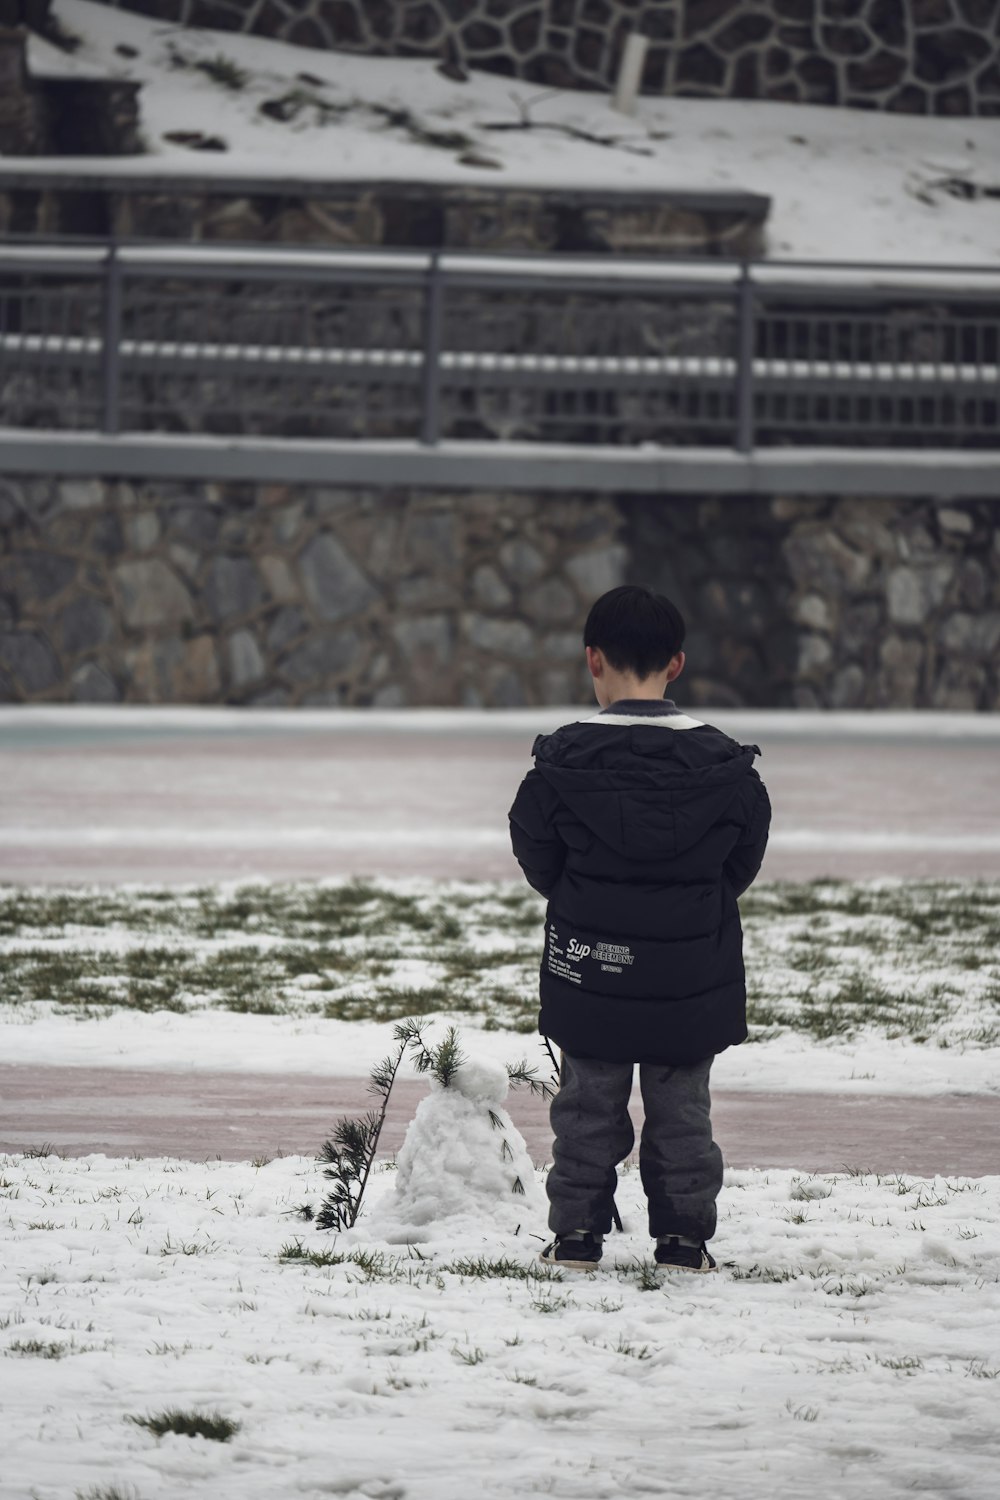 a young boy standing in the snow next to a snowboard